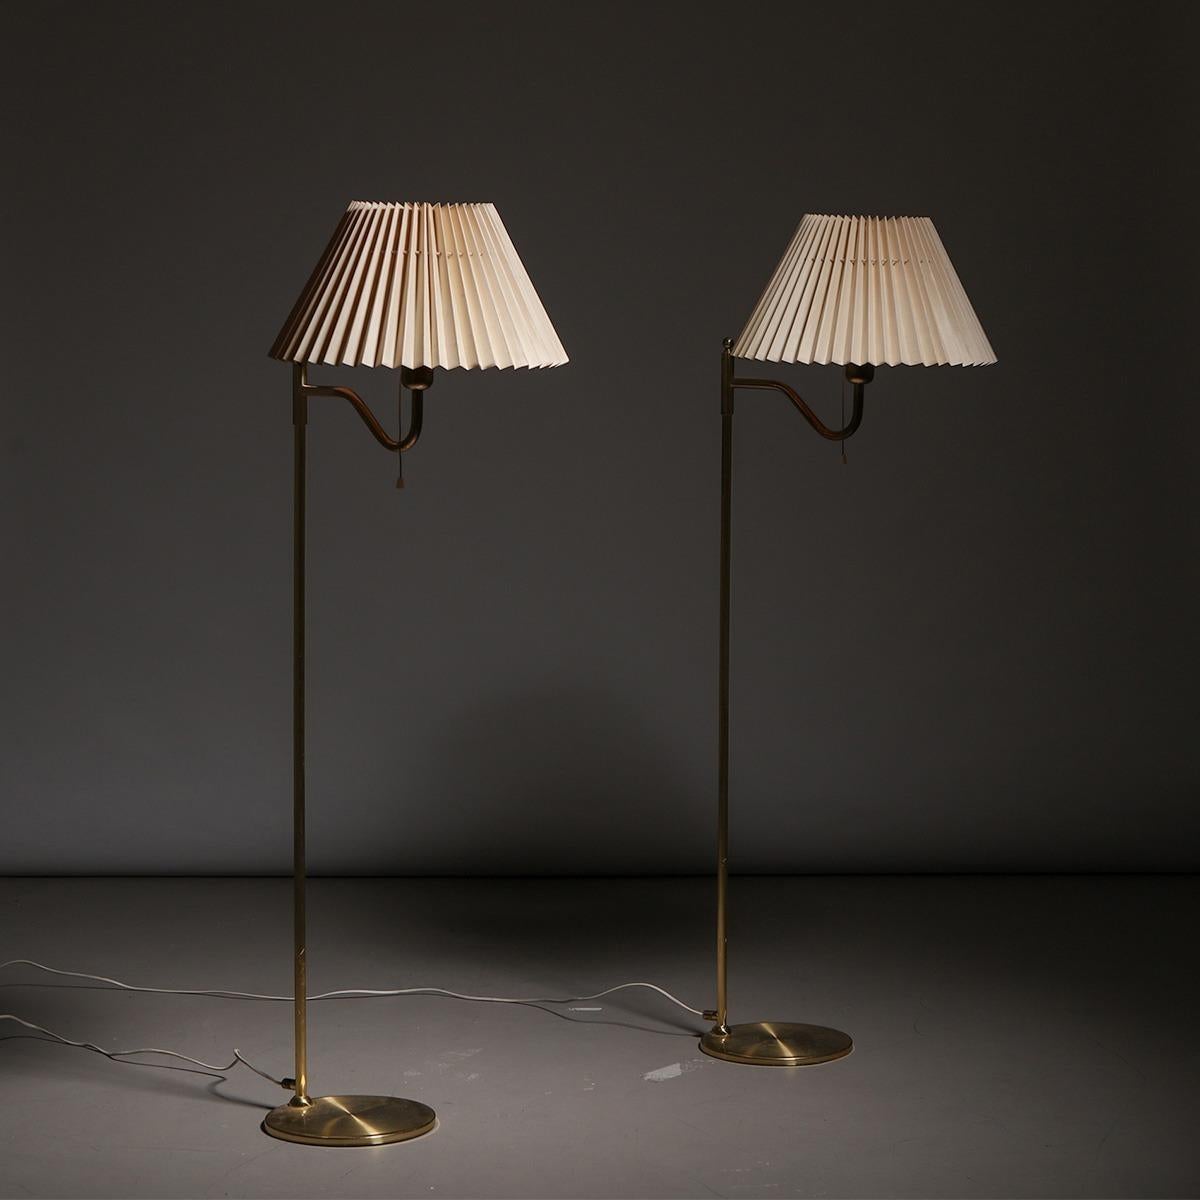 Pair of Scandinavian brass floor lamps, made in Sweden, 1960s.
The lamps feature the original manufacturer’s stamp.

Date of manufacture: 1960s
Origin: Sweden
Material: brass, fabric shades
Dimensions: H 115 cm x W 40 cm x D 50 cm
Condition: in